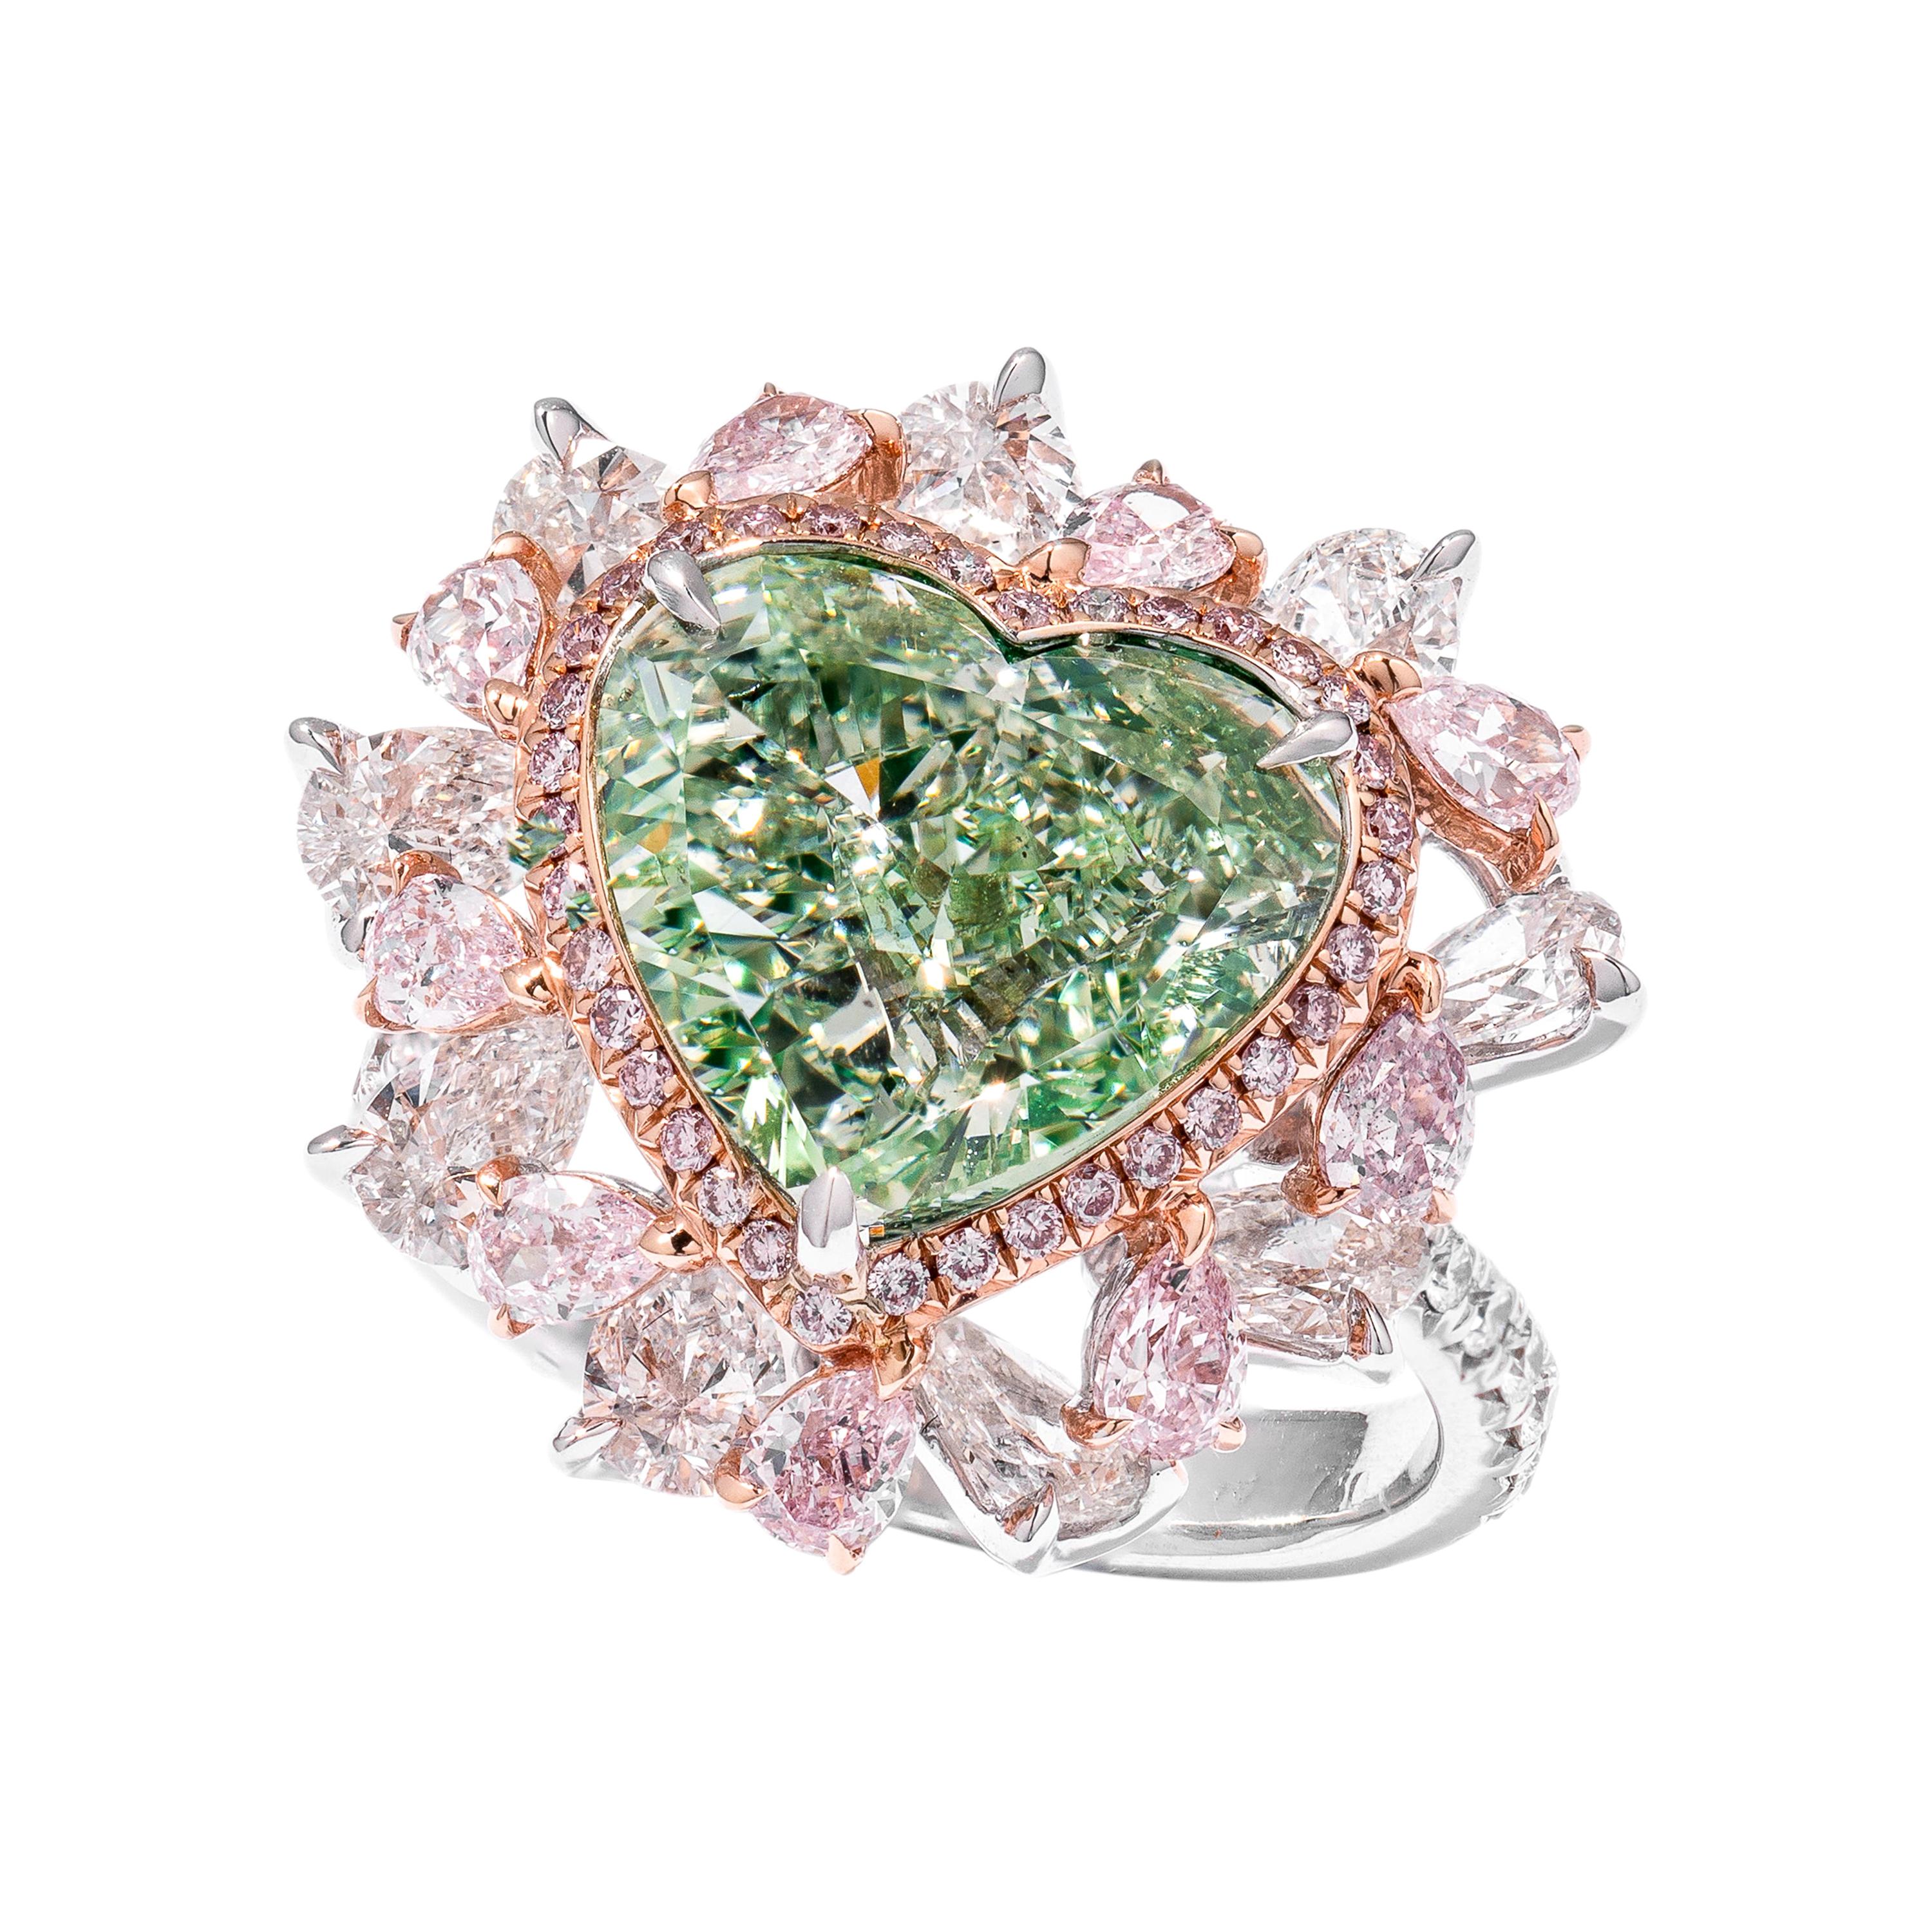 GIA Certified 8.51 Carat Fancy Yellow Green and Pink Diamond Ring in 18K Gold